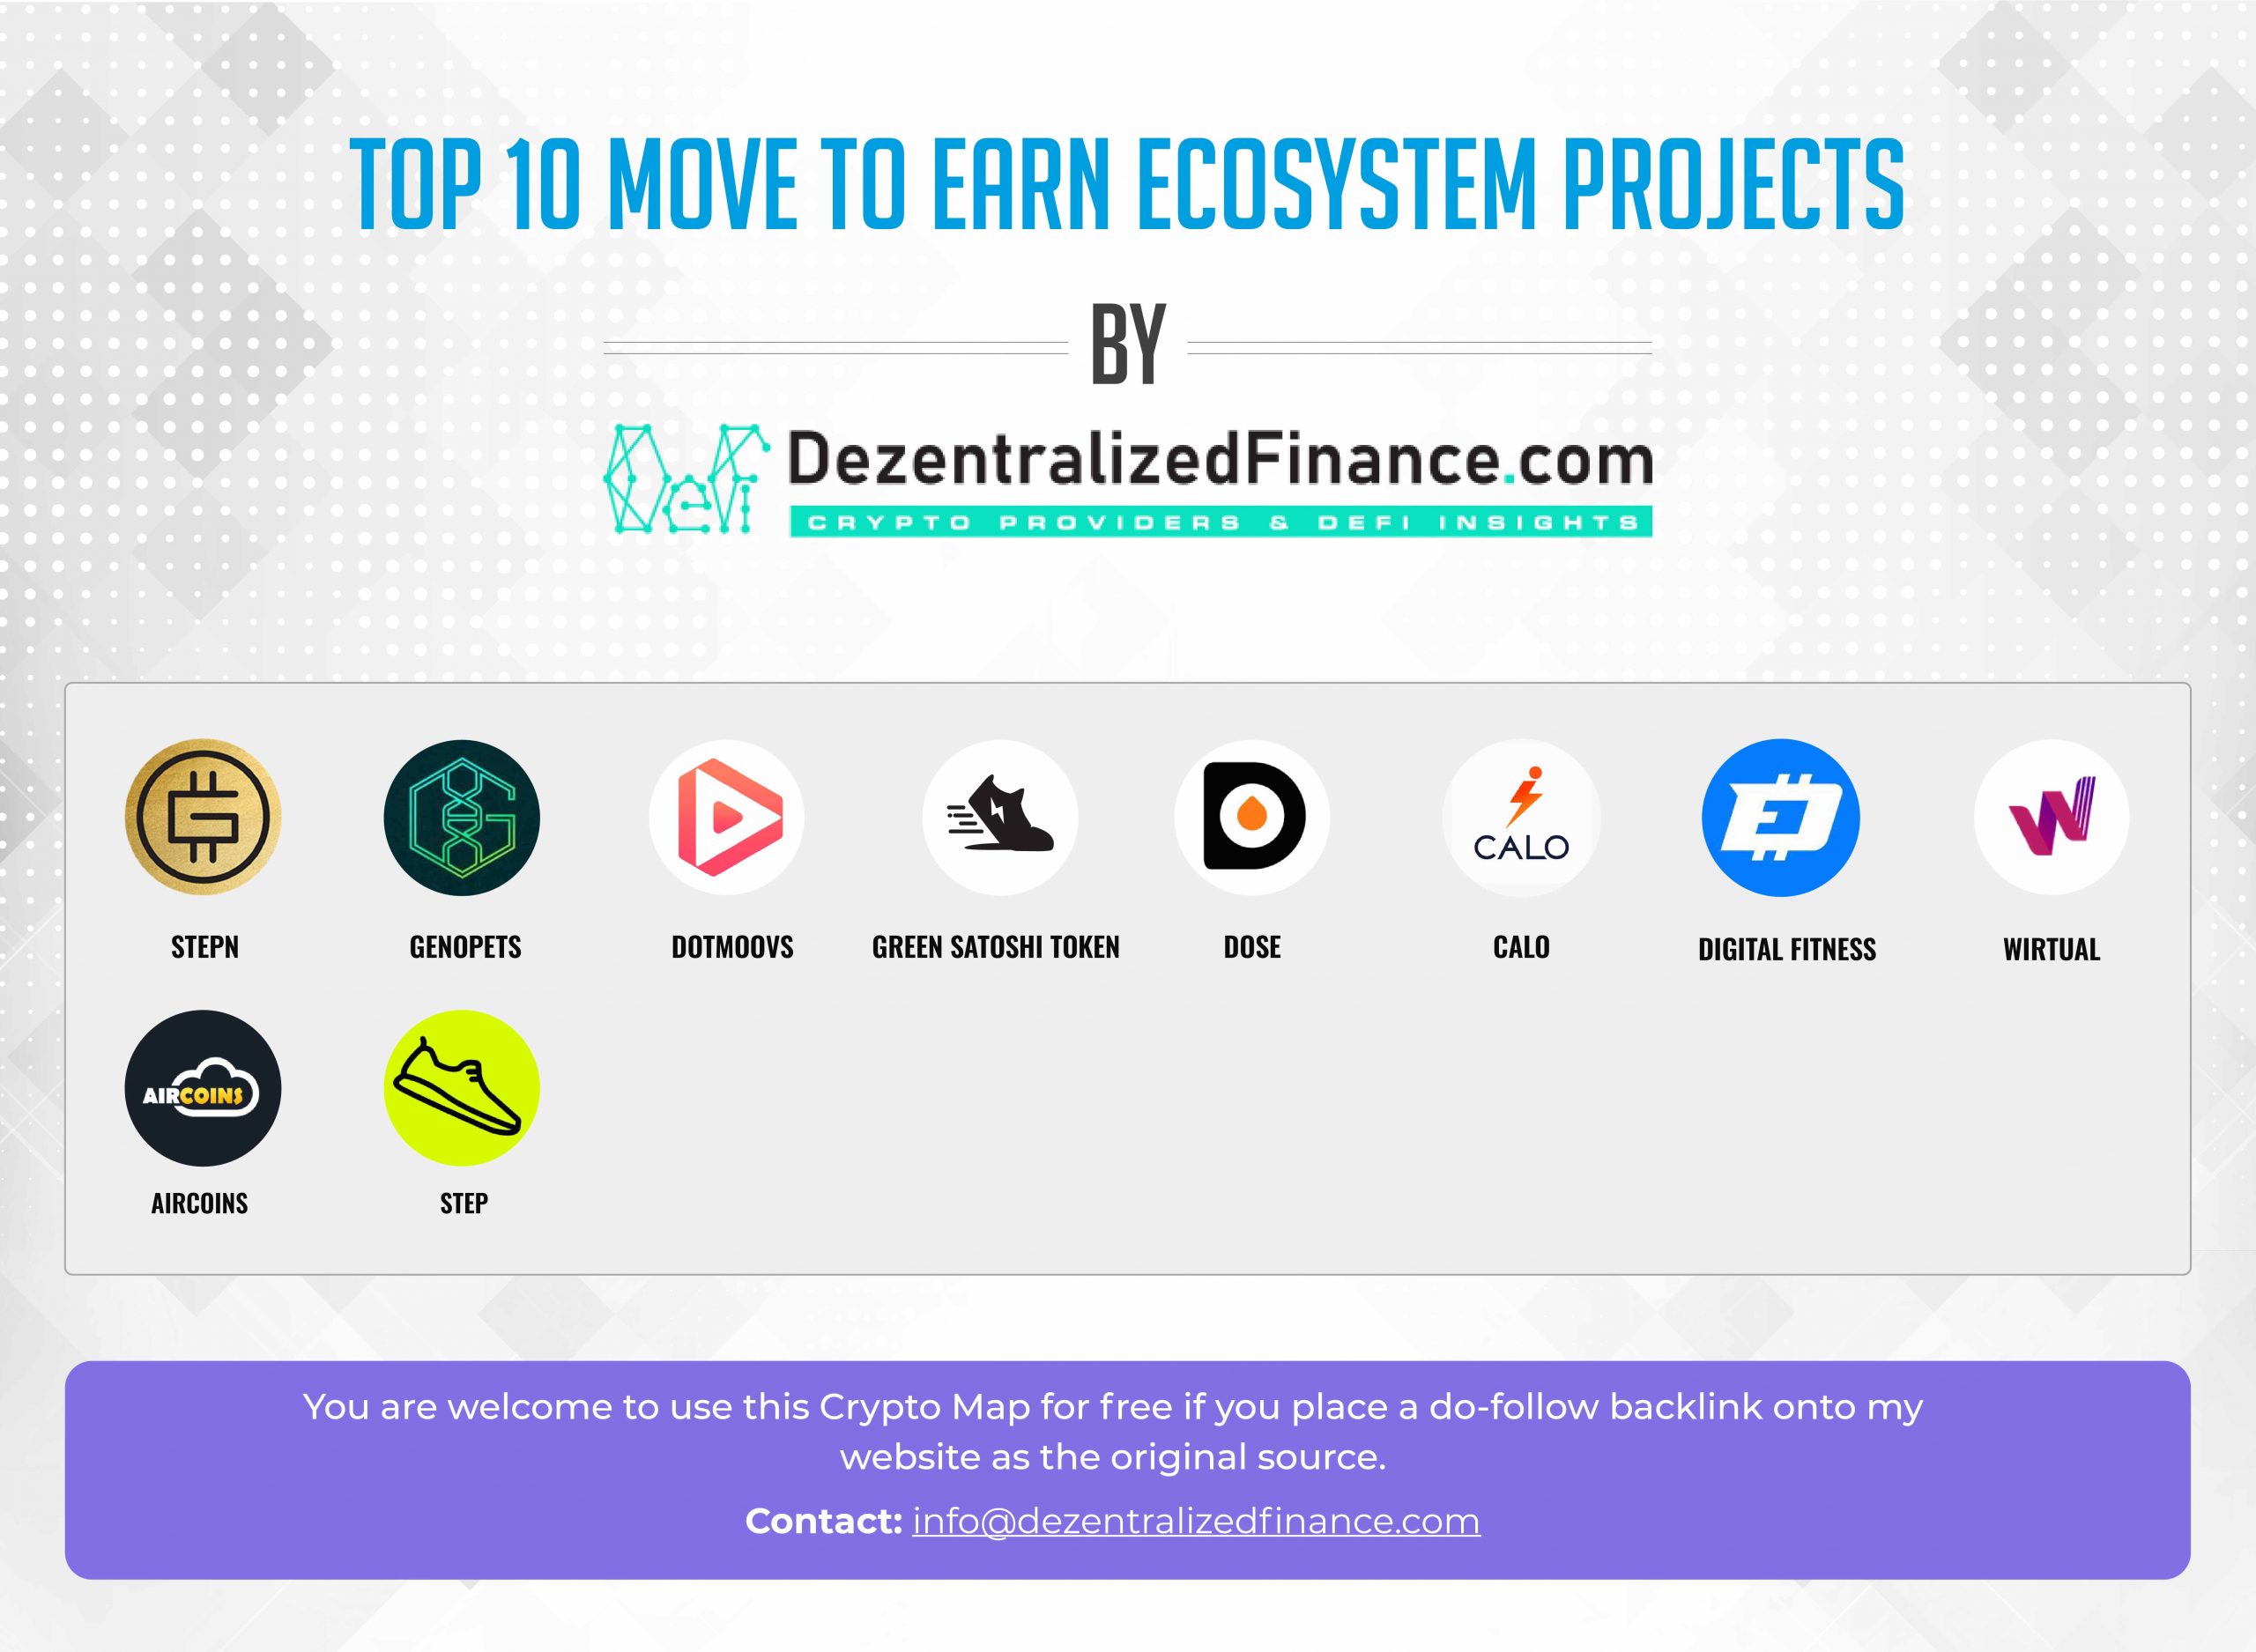 Top 10 Move to Earn Ecosystem Projects scaled